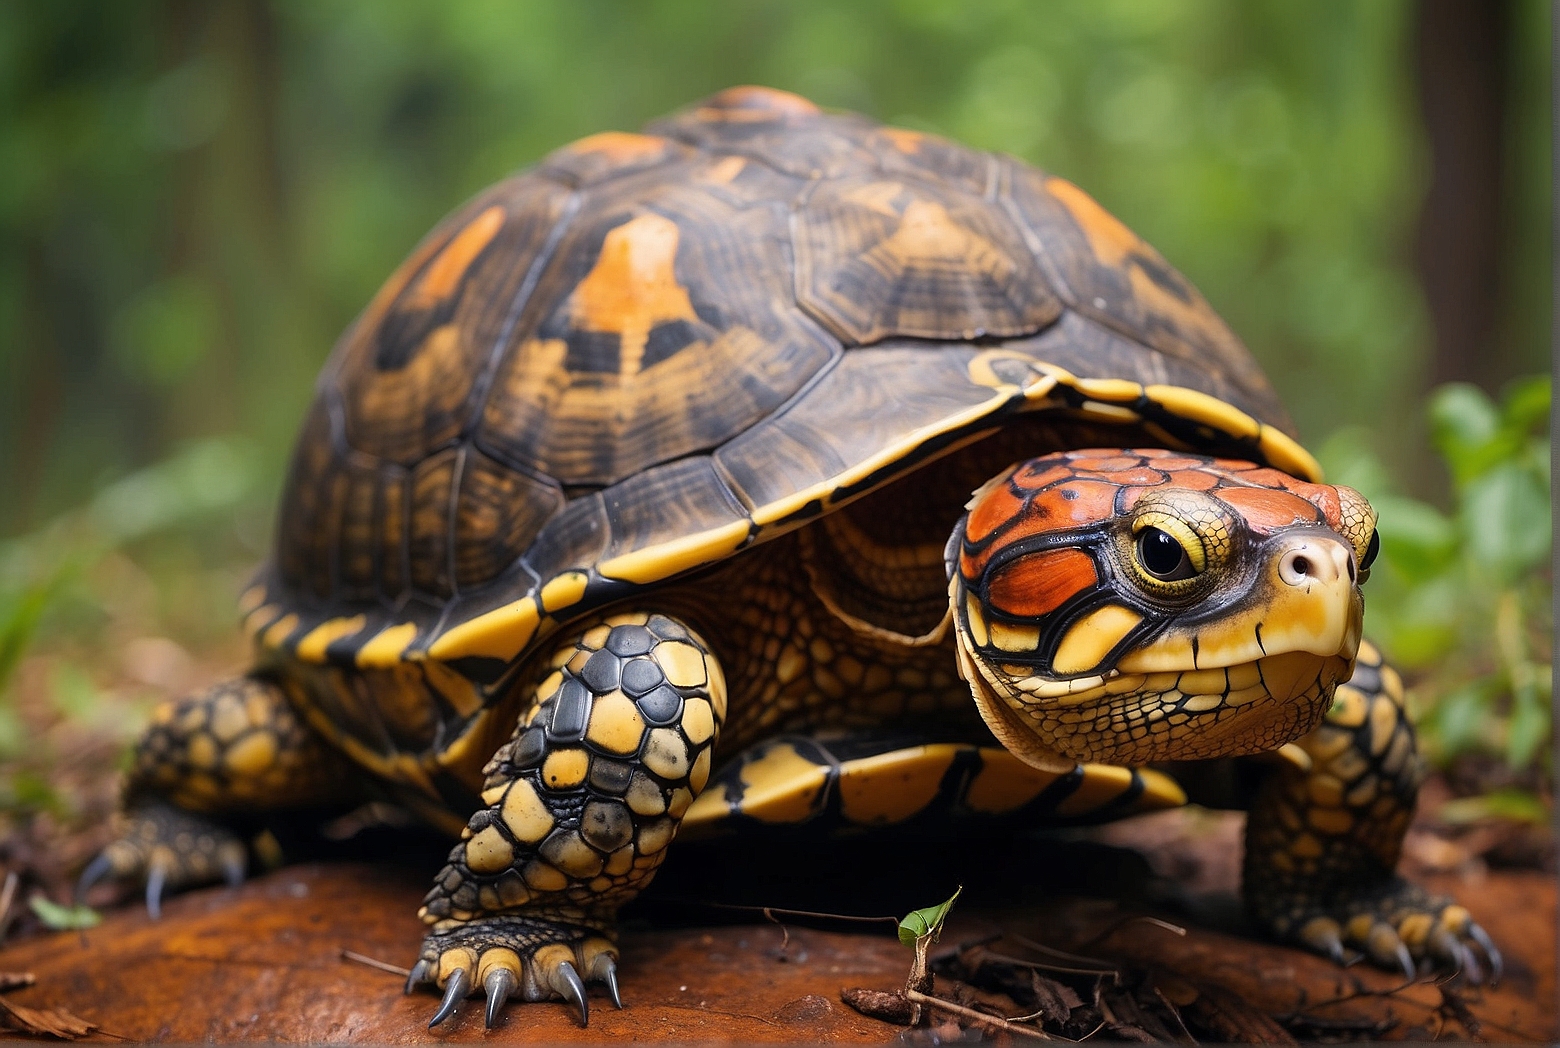 Choosing the Right Tank Size for Your Eastern Box Turtle